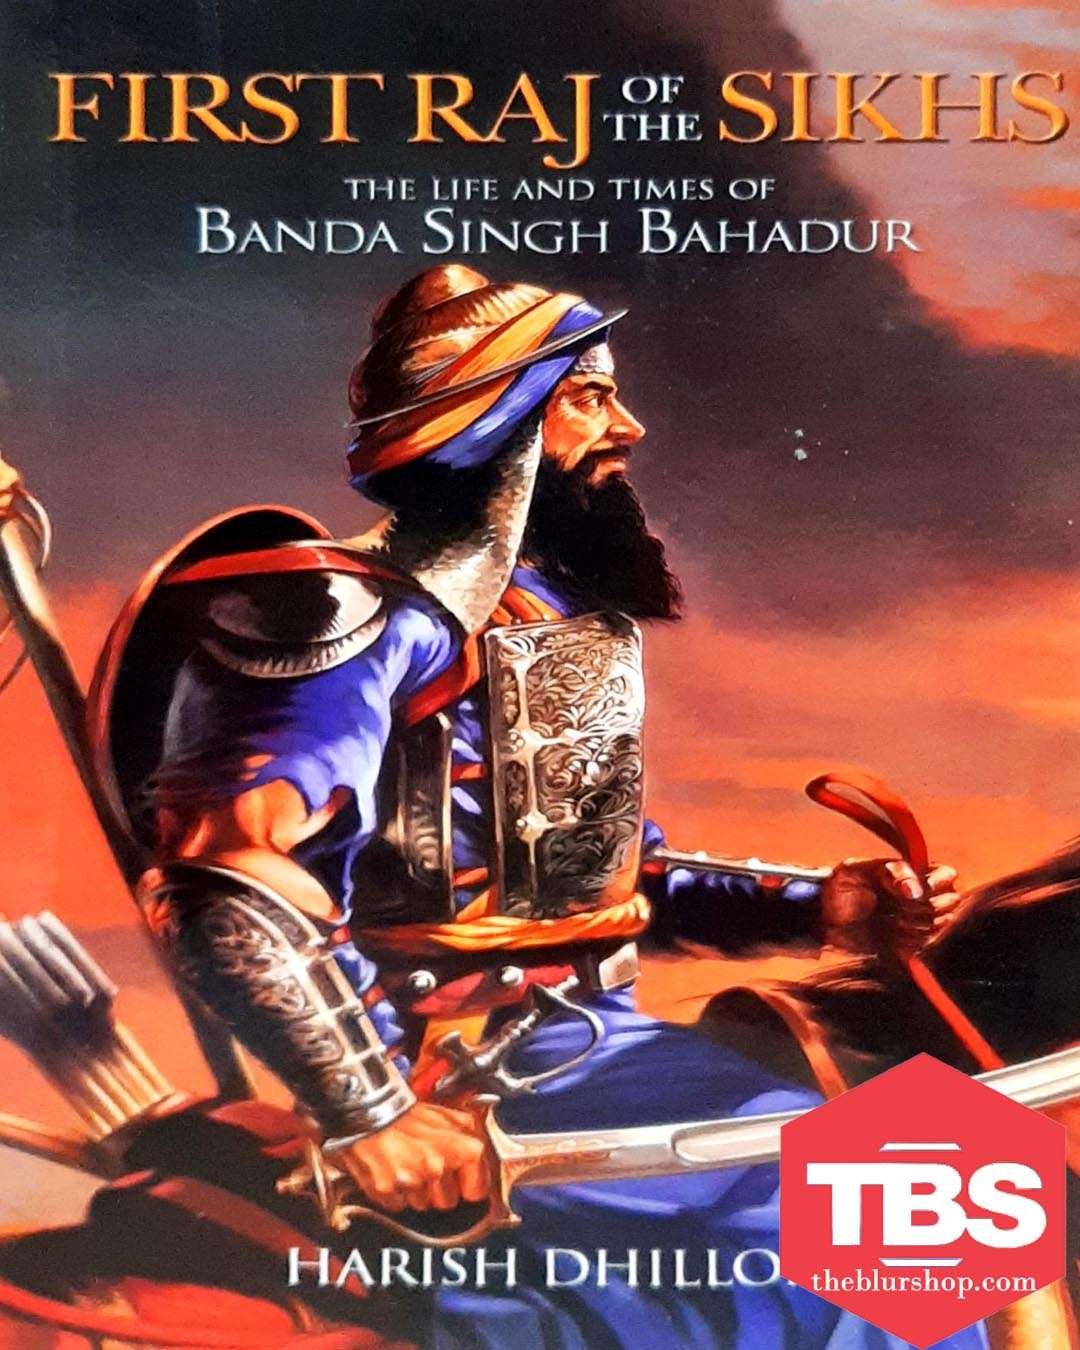 First Raj of The Sikhs: The Life And Times of Banda Singh Bahadur